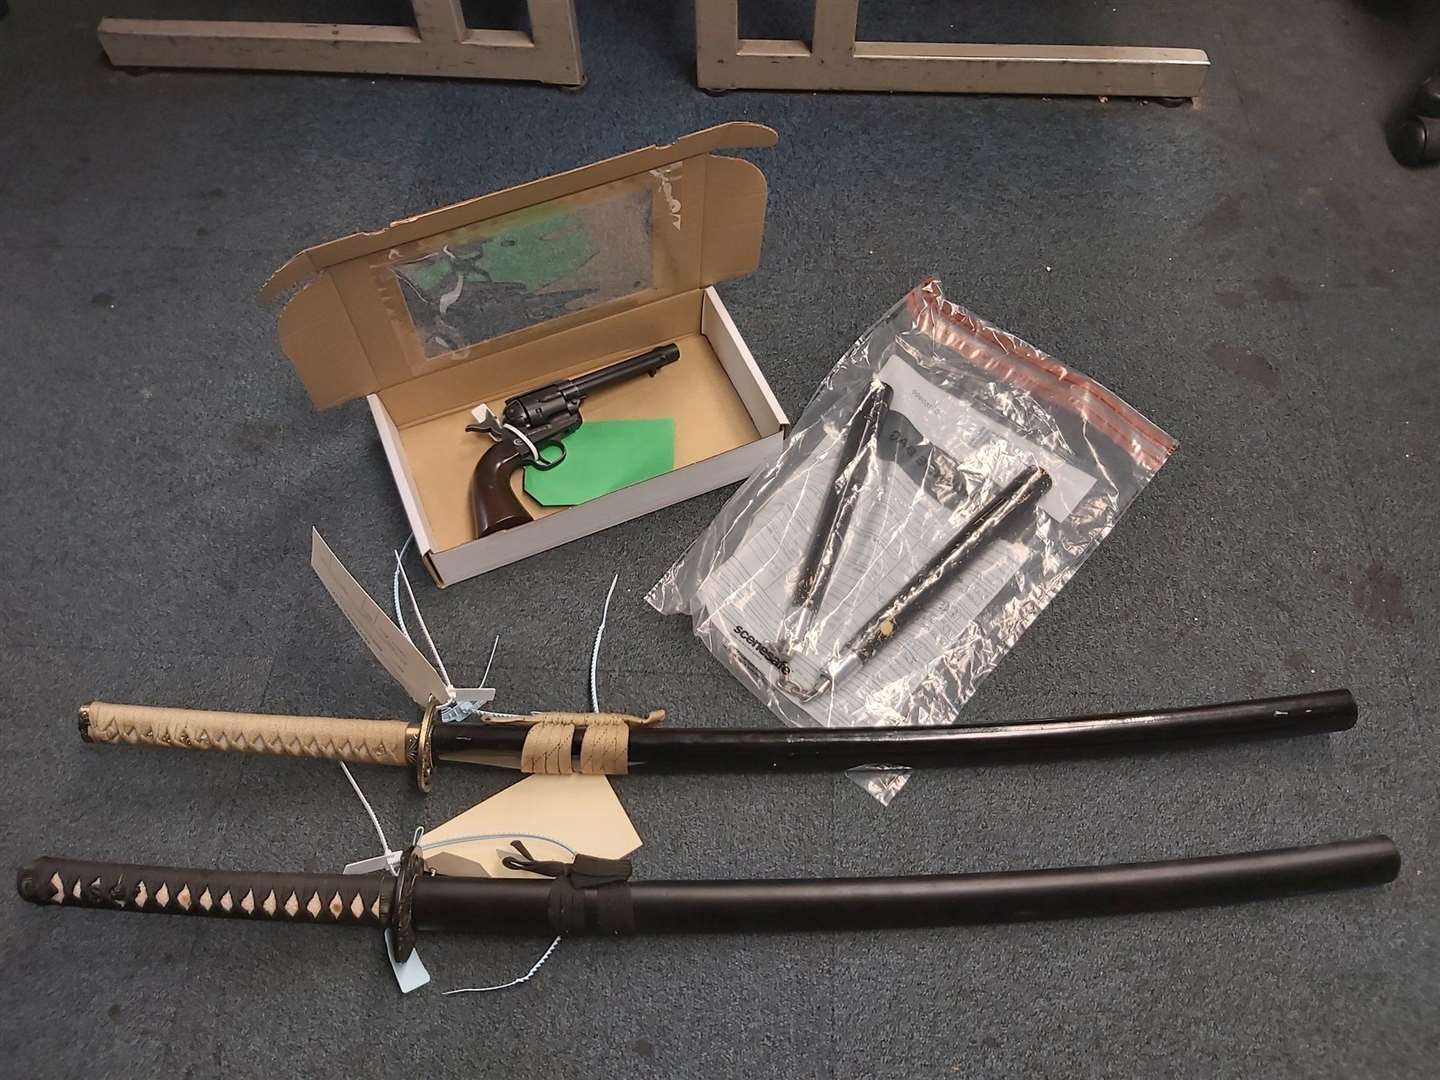 Two samurai swords, an imitation gun and nunchucks were seized by police. Picture: Kent Police